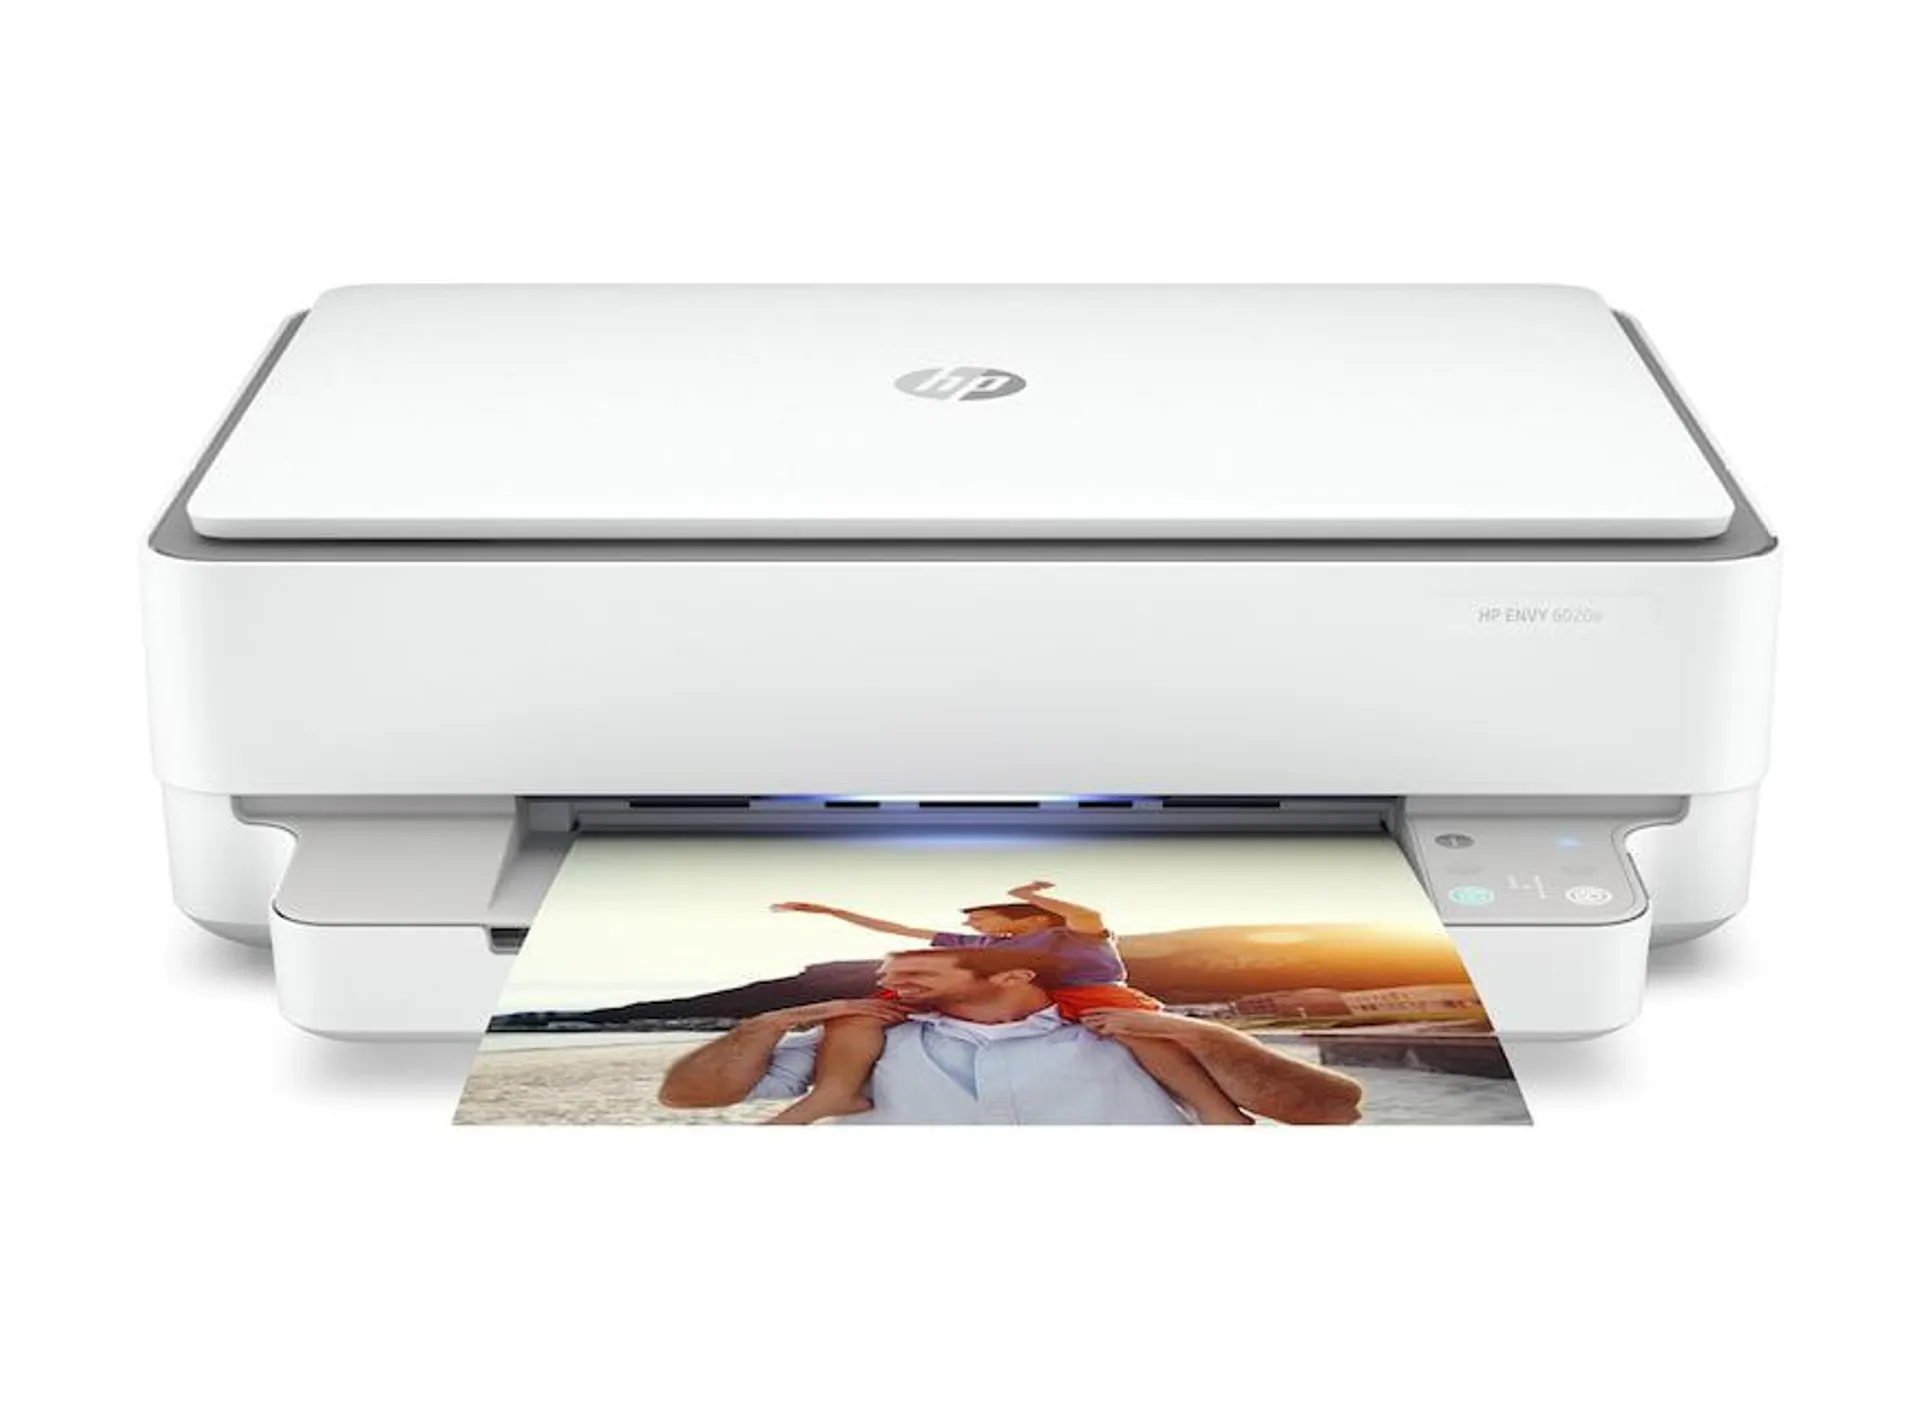 HP ENVY 6020e HP+ enabled All-in-One Wireless Colour Printer with 6 months Instant Ink